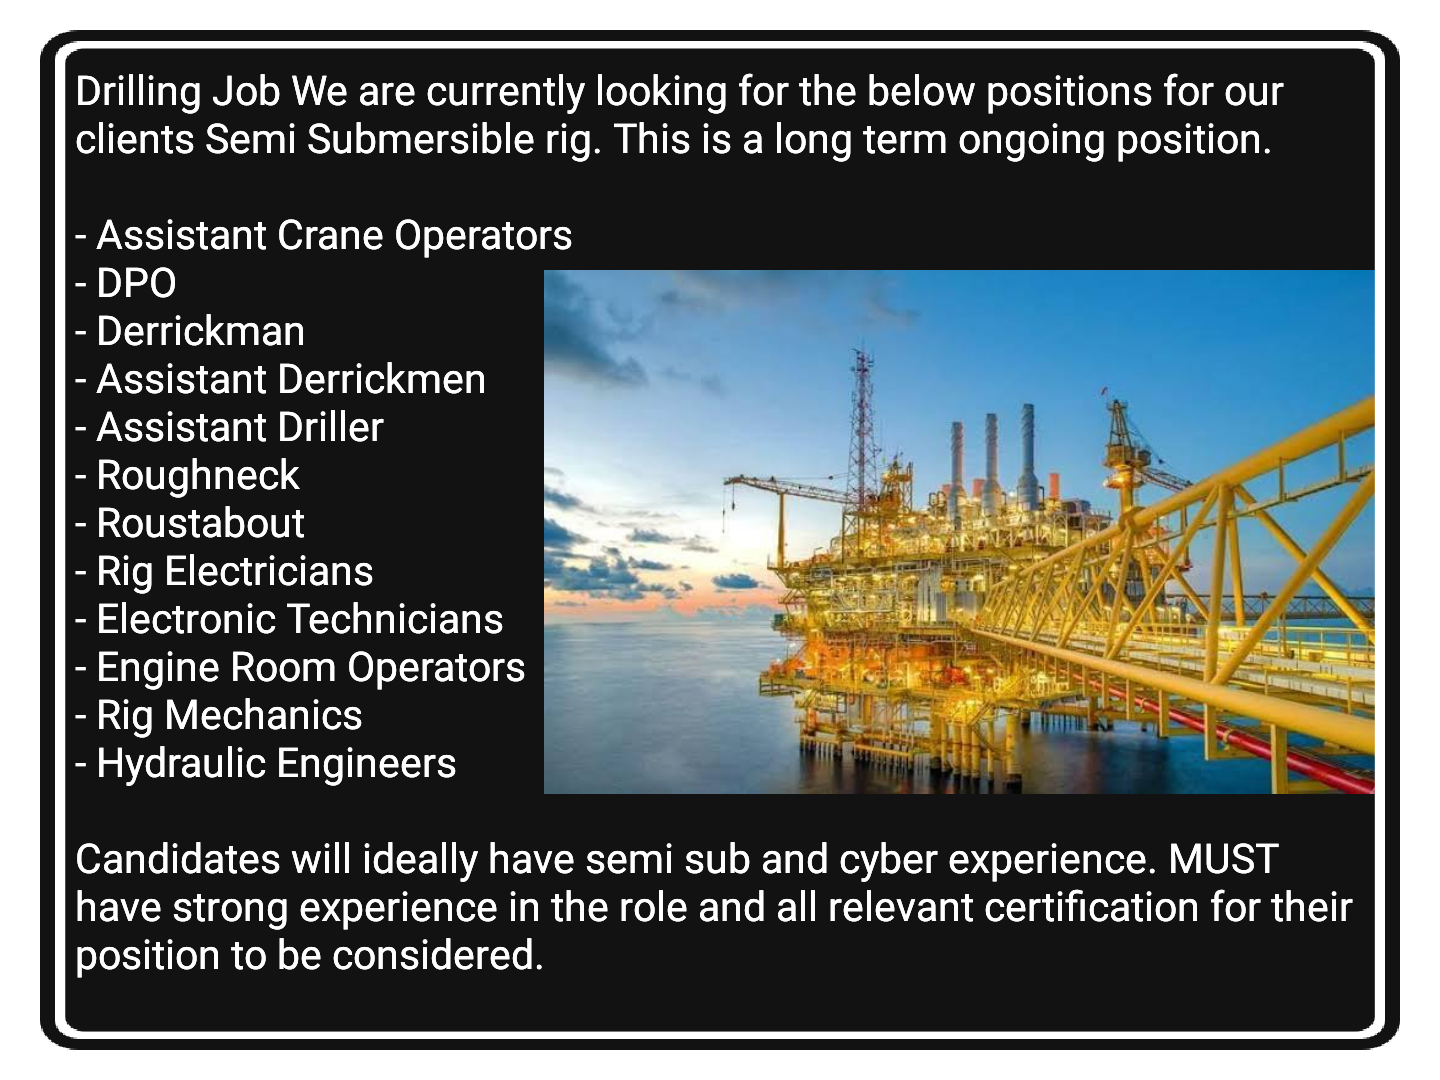 Drilling, Derrickman, Roustabout, Roughneck, Rig Mechanic & Electrician Jobs